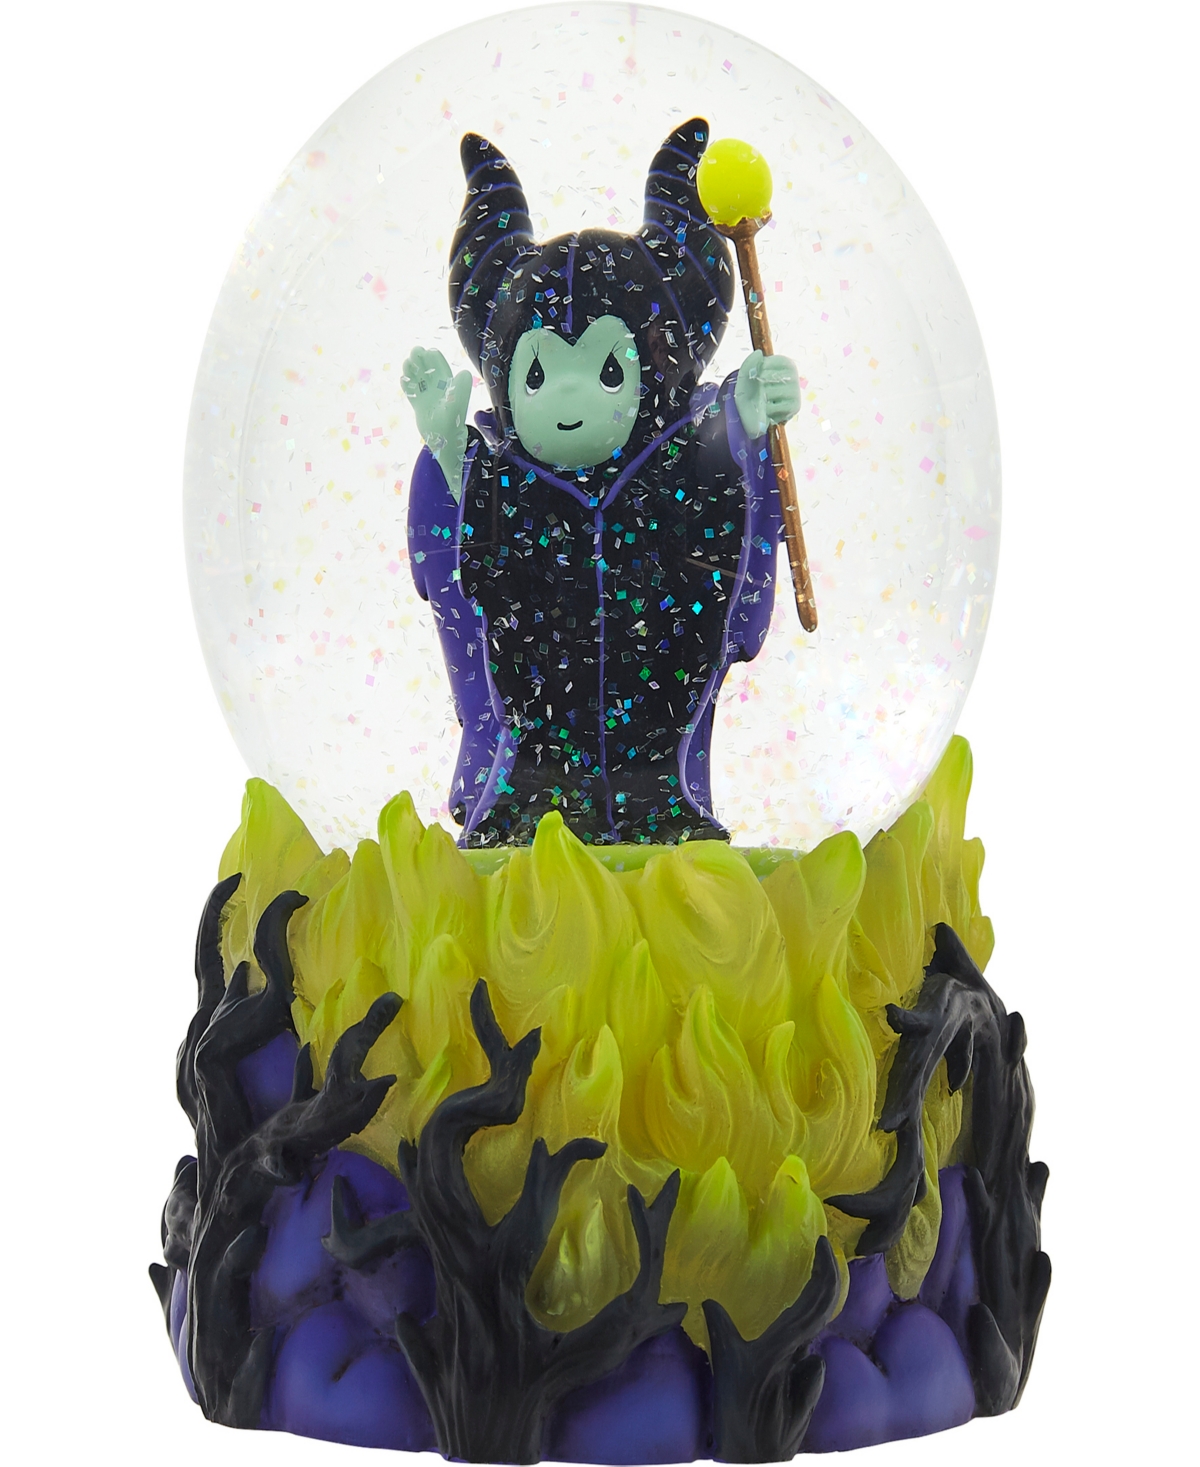 222104 Disney Maleficent Musical Resin and Glass Snow Globe - Multicolored